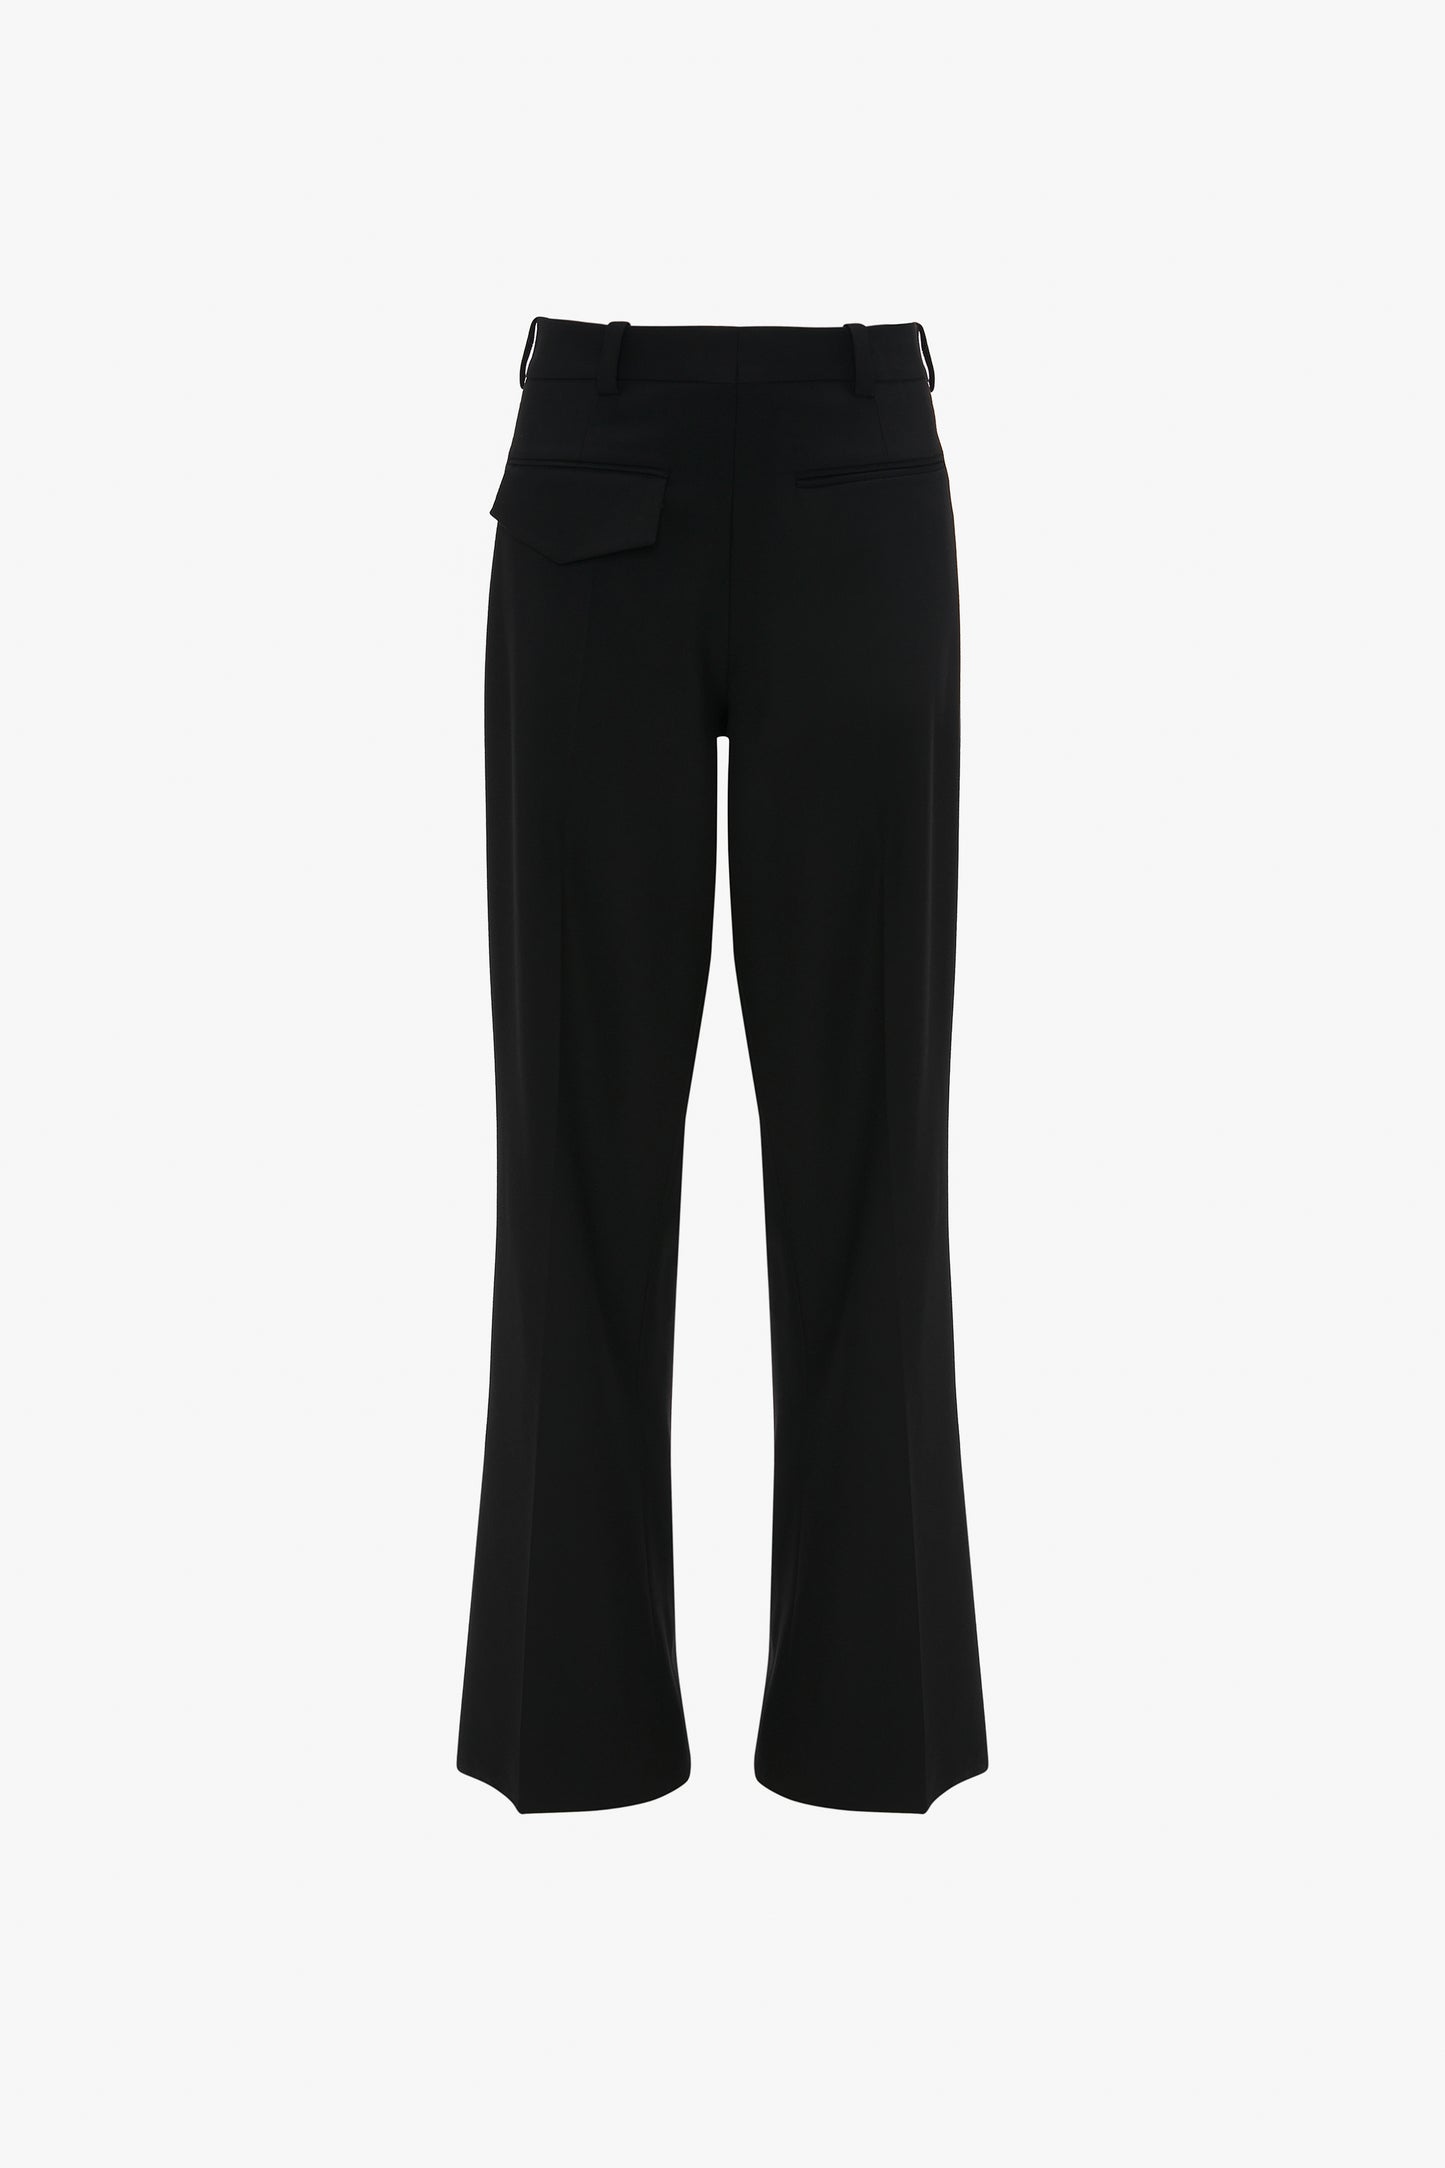 Black high-waisted Reverse Front Trousers In Black with a contemporary silhouette and side pockets, displayed on a white background by Victoria Beckham.